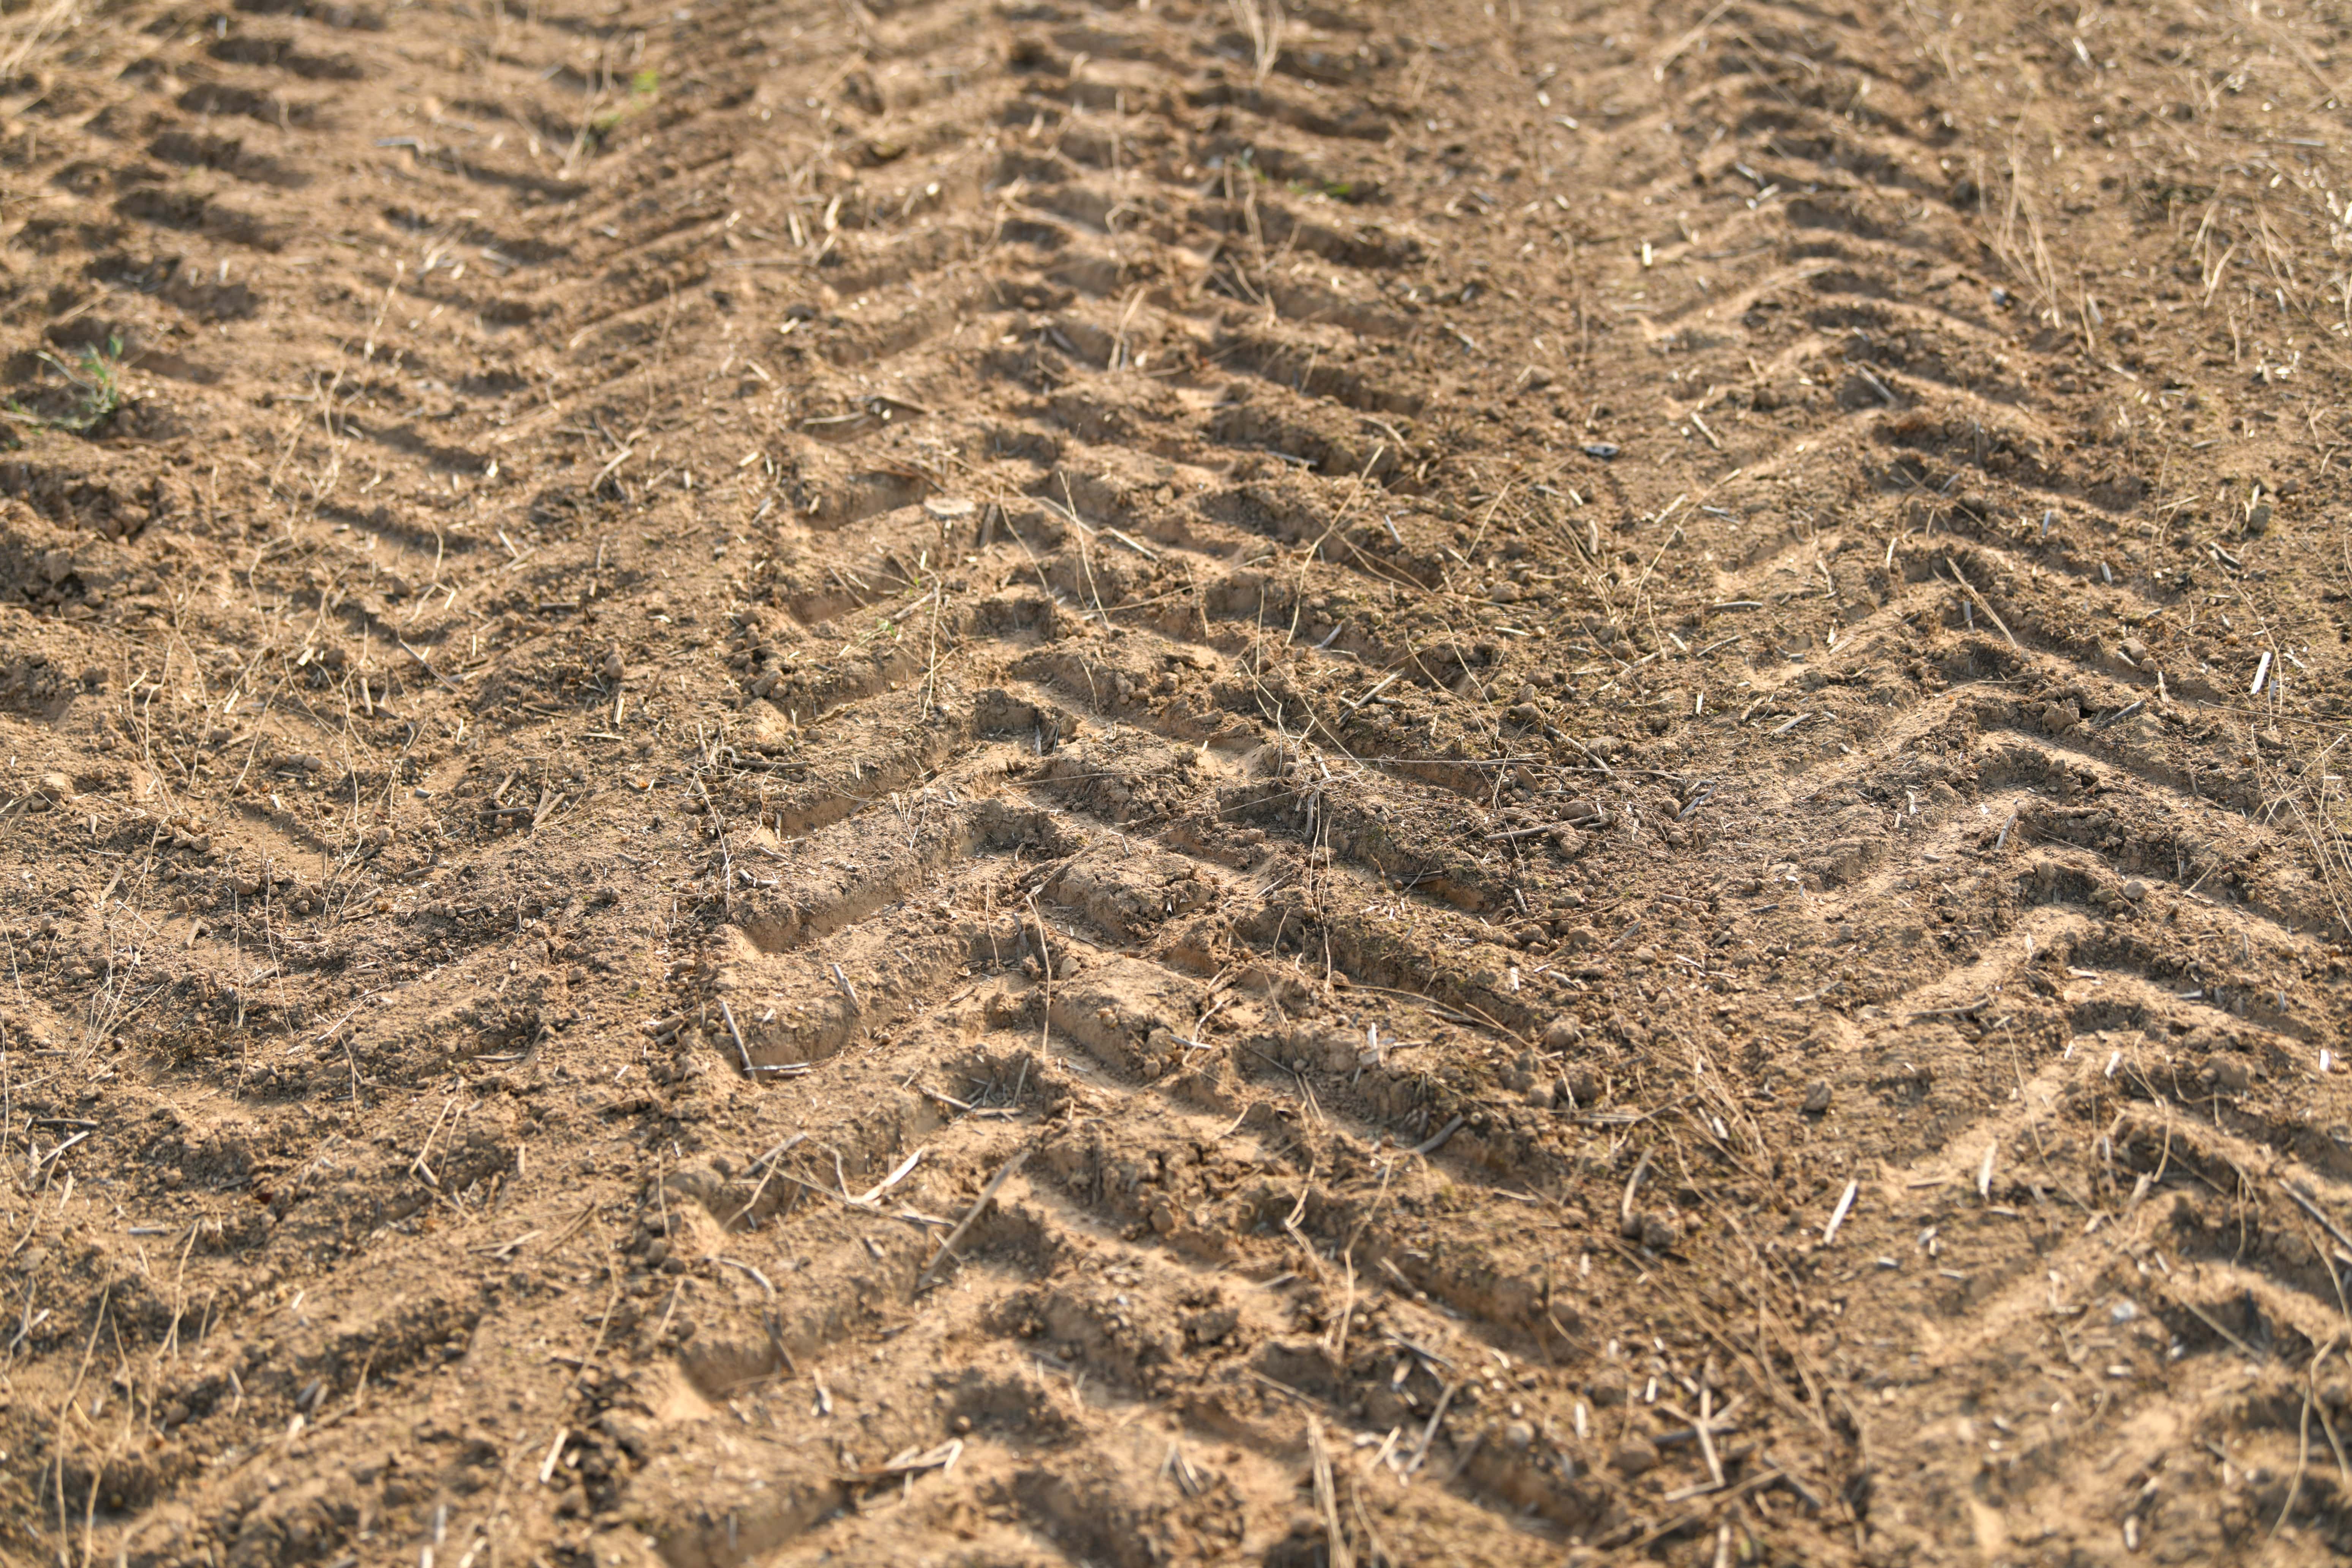 Lug tractor tire tread impressions in the field dirt.